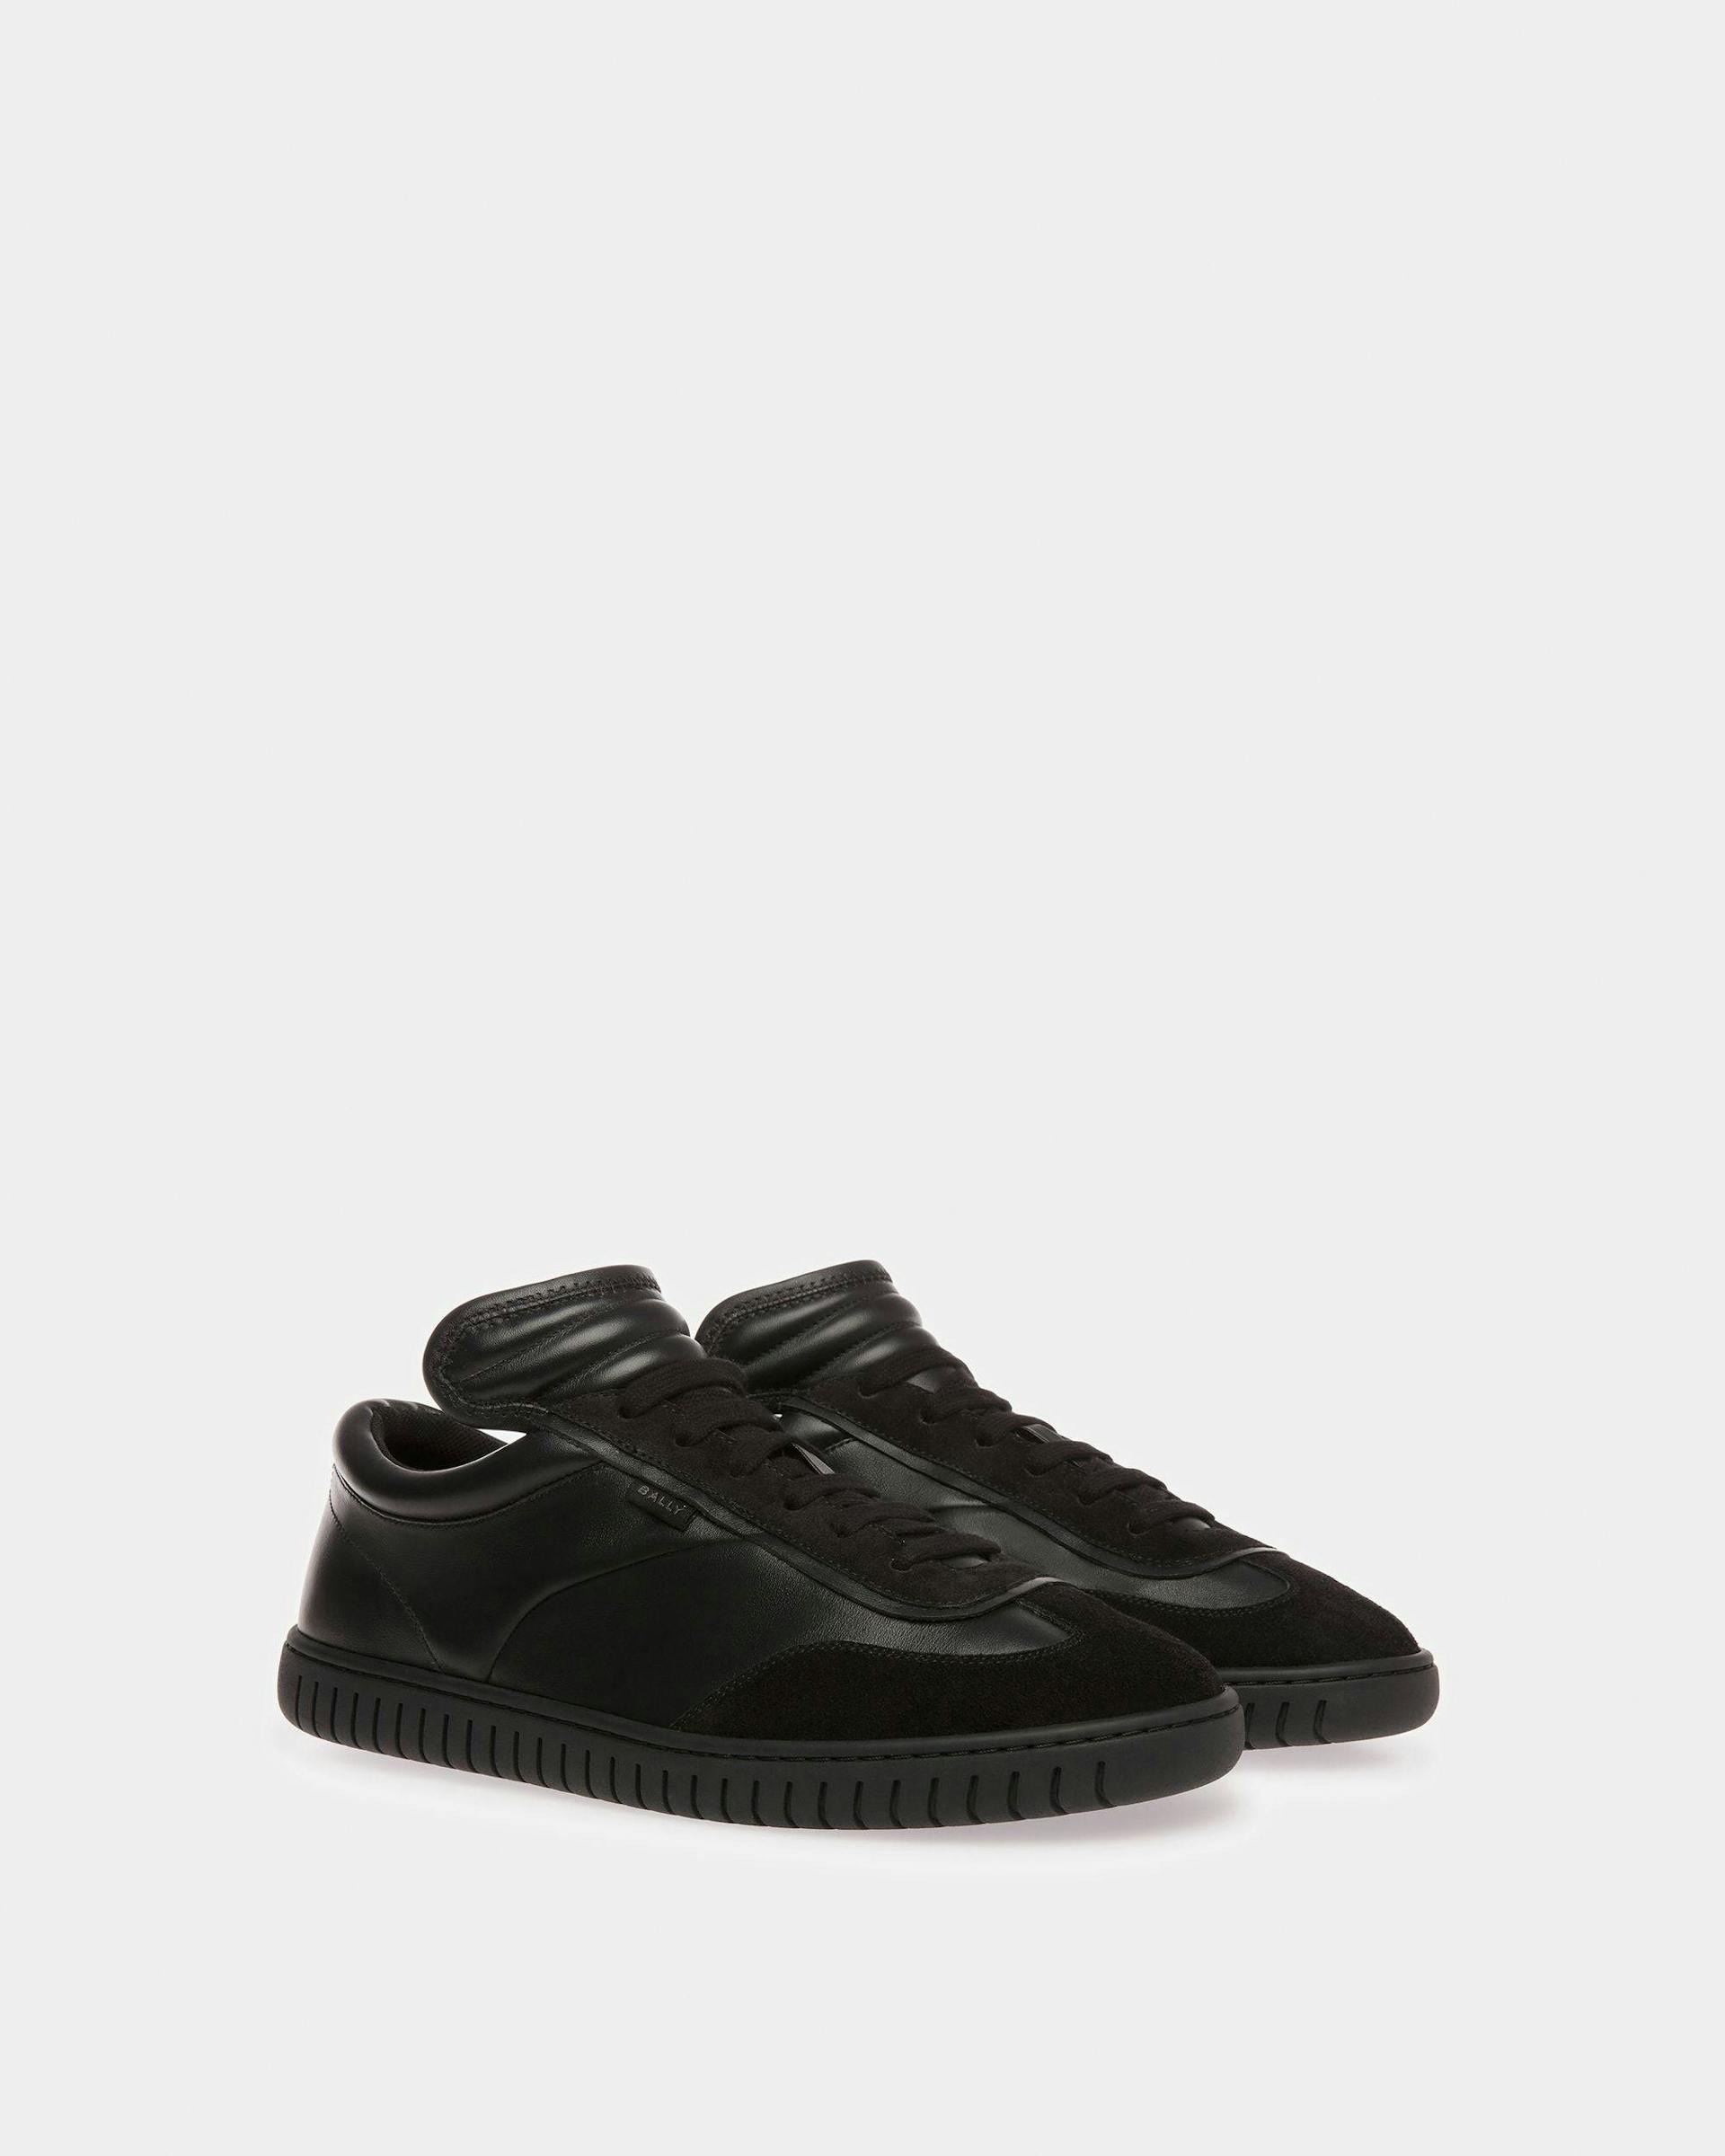 Player Sneakers In Black Leather - Men's - Bally - 02